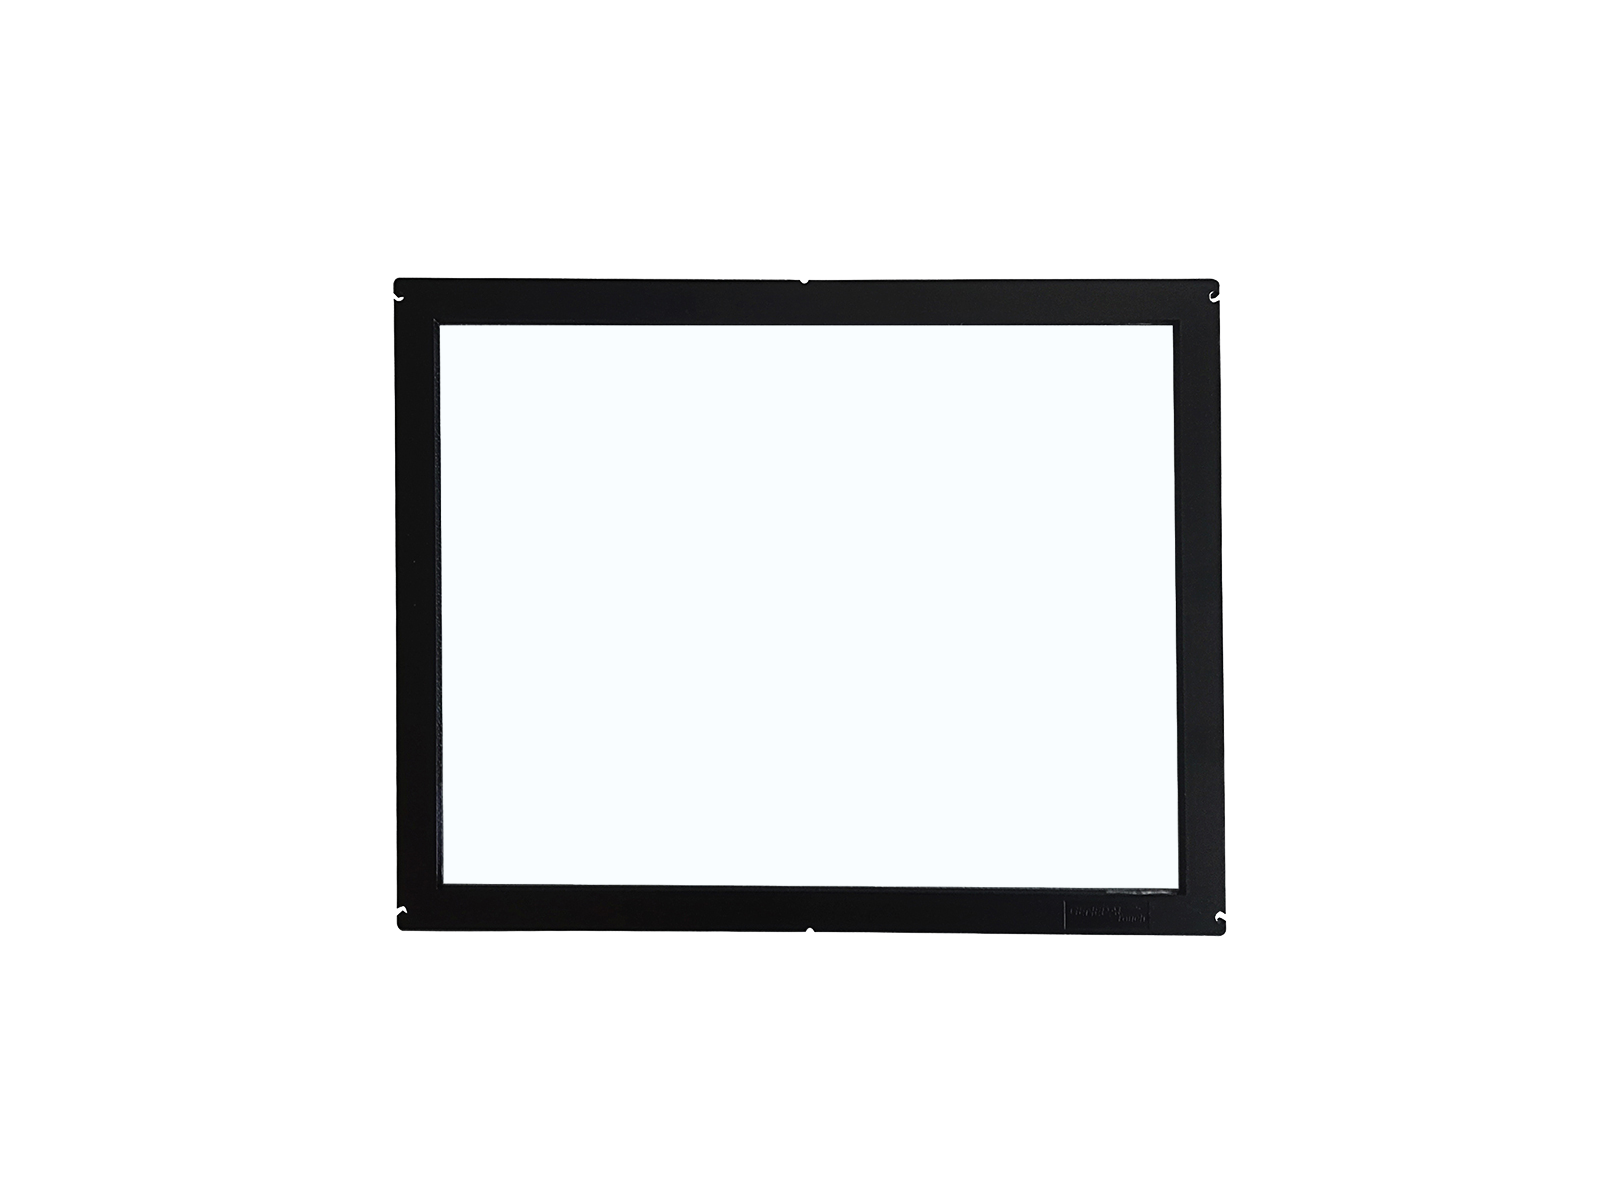 IR touchscreen 15″ or 21.5″ Featured Image